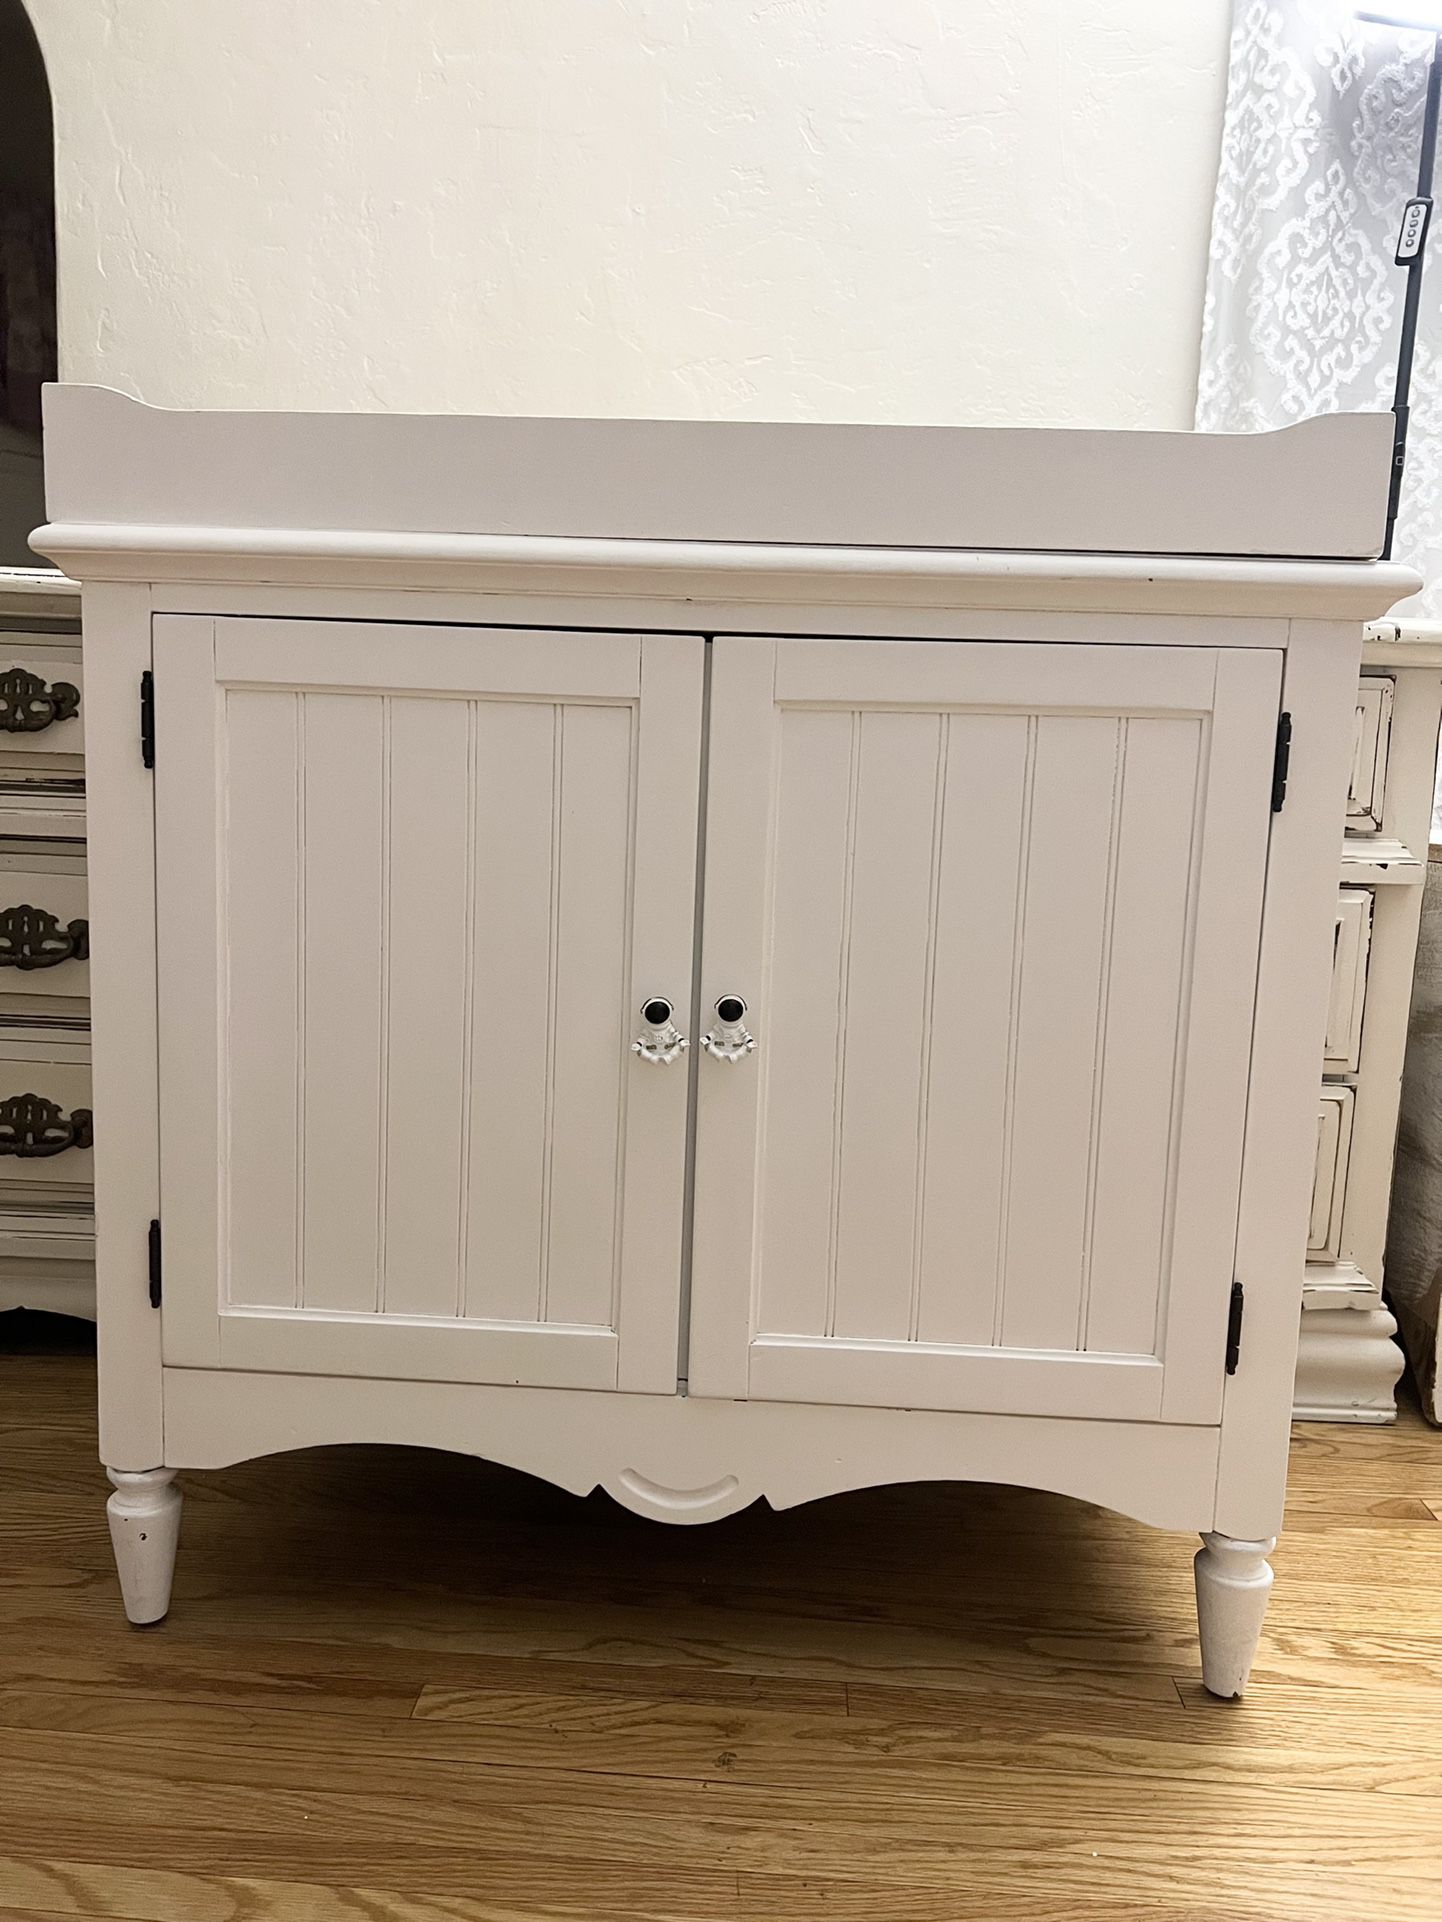 Nursery dresser With changing table Topper (removable) 